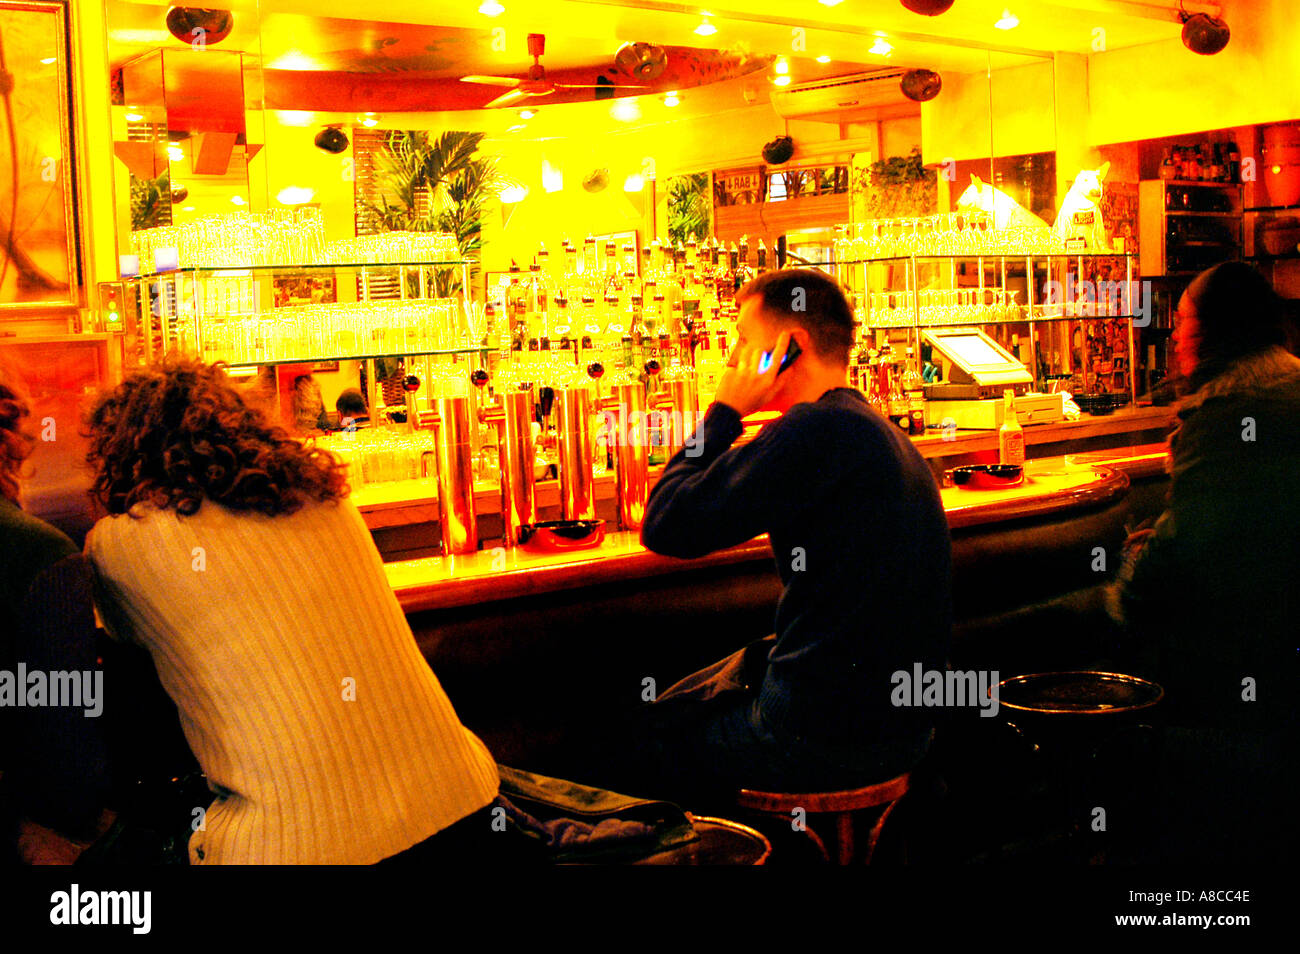 Gay Bar, PARIS France, 'L'Amnesia Cafe' in Le Marais Area  People, Man inside Cellphone Trendy Bar Pub (now closed) talking on phone, drink alcohol Stock Photo